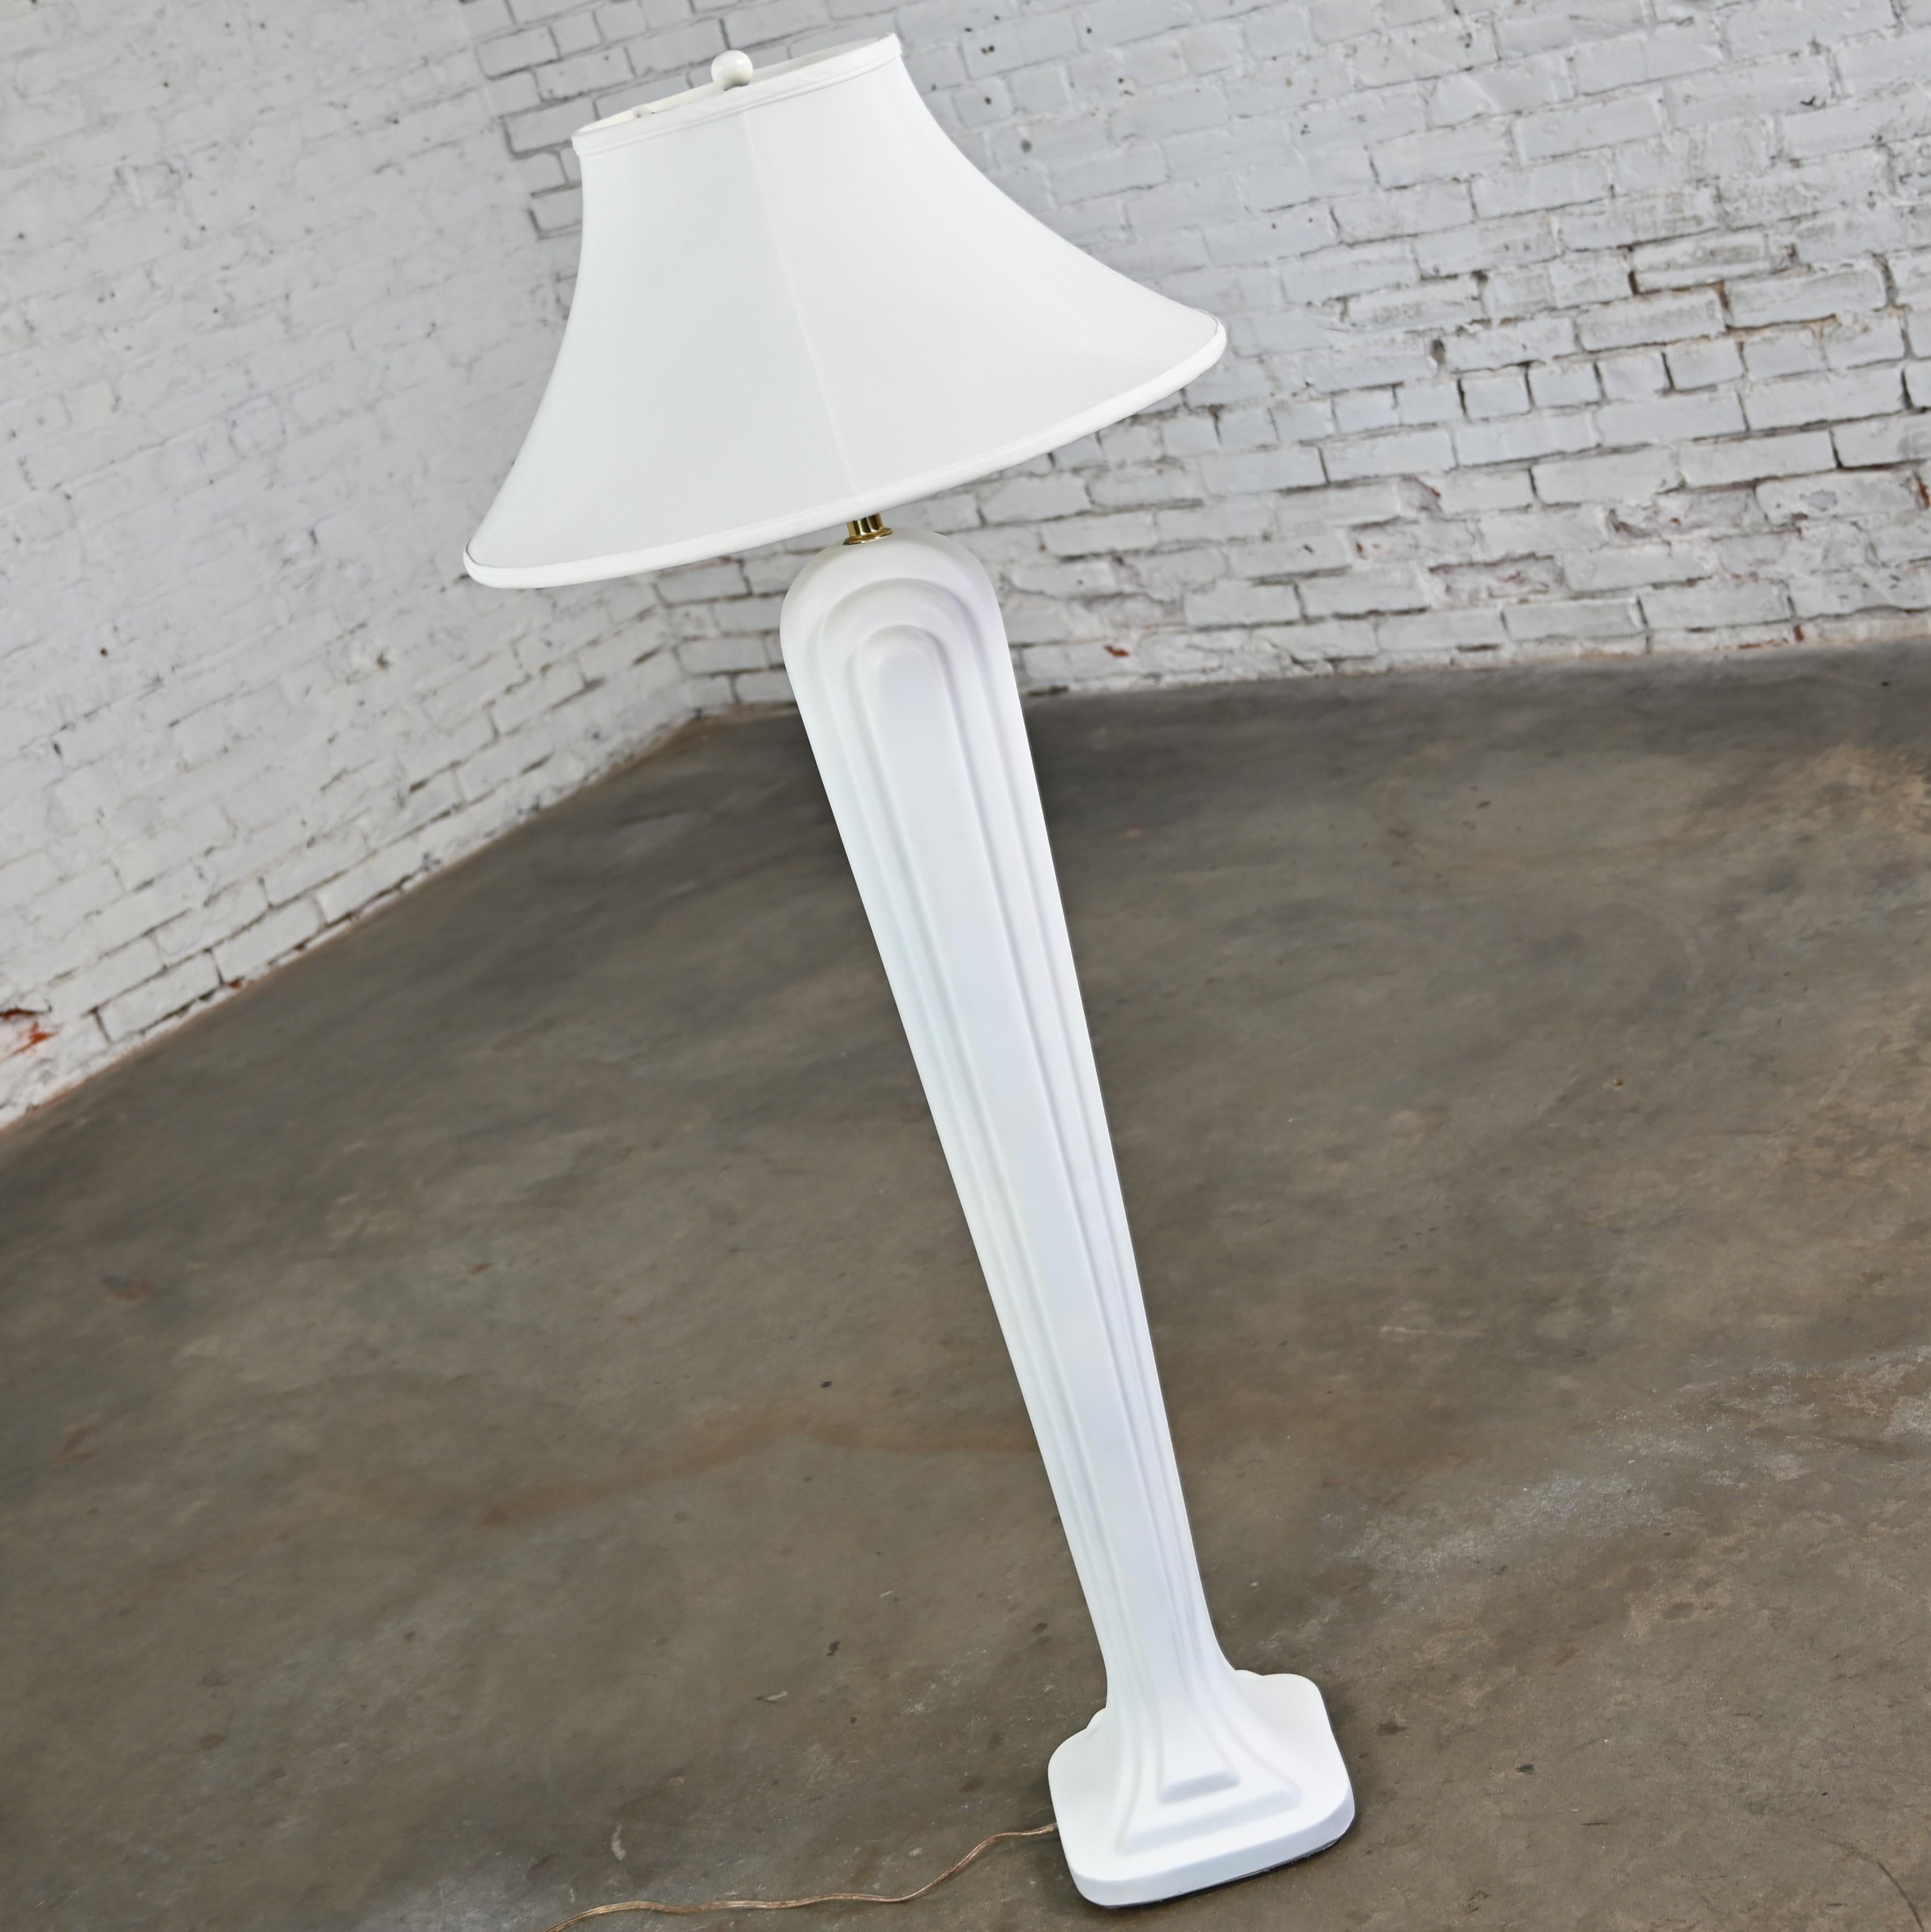 Art Deco Revival to Postmodern Paolo Gucci Floor Lamp White Sculpted Resin  For Sale 1